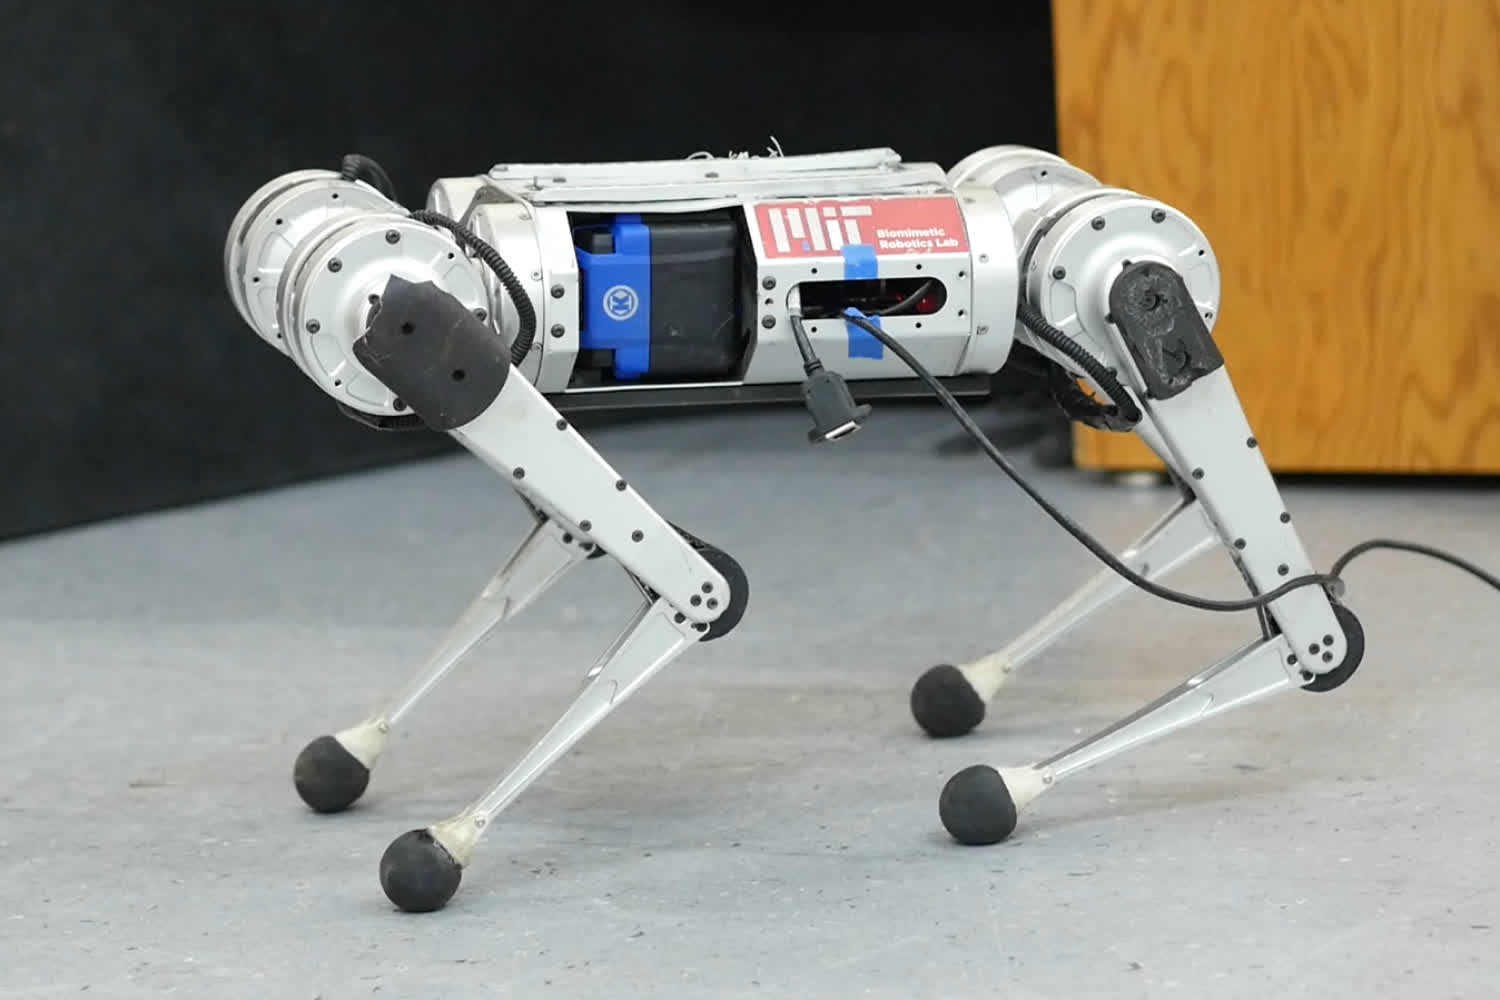 MIT's robot cheetah taught itself how to run fast and traverse tricky terrain